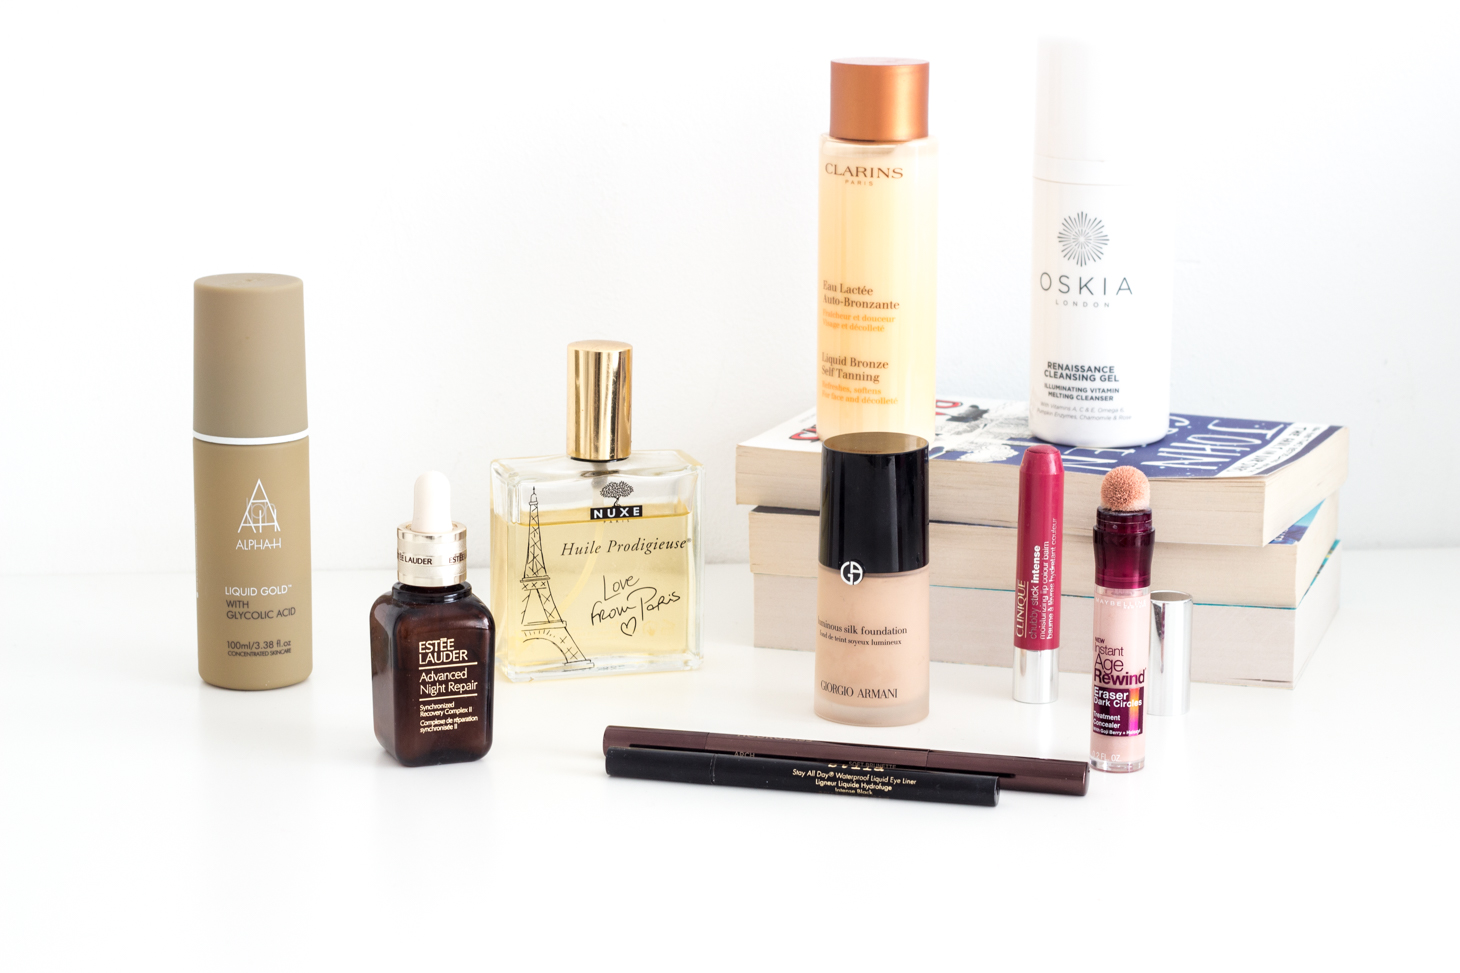 My most repurchased beauty products